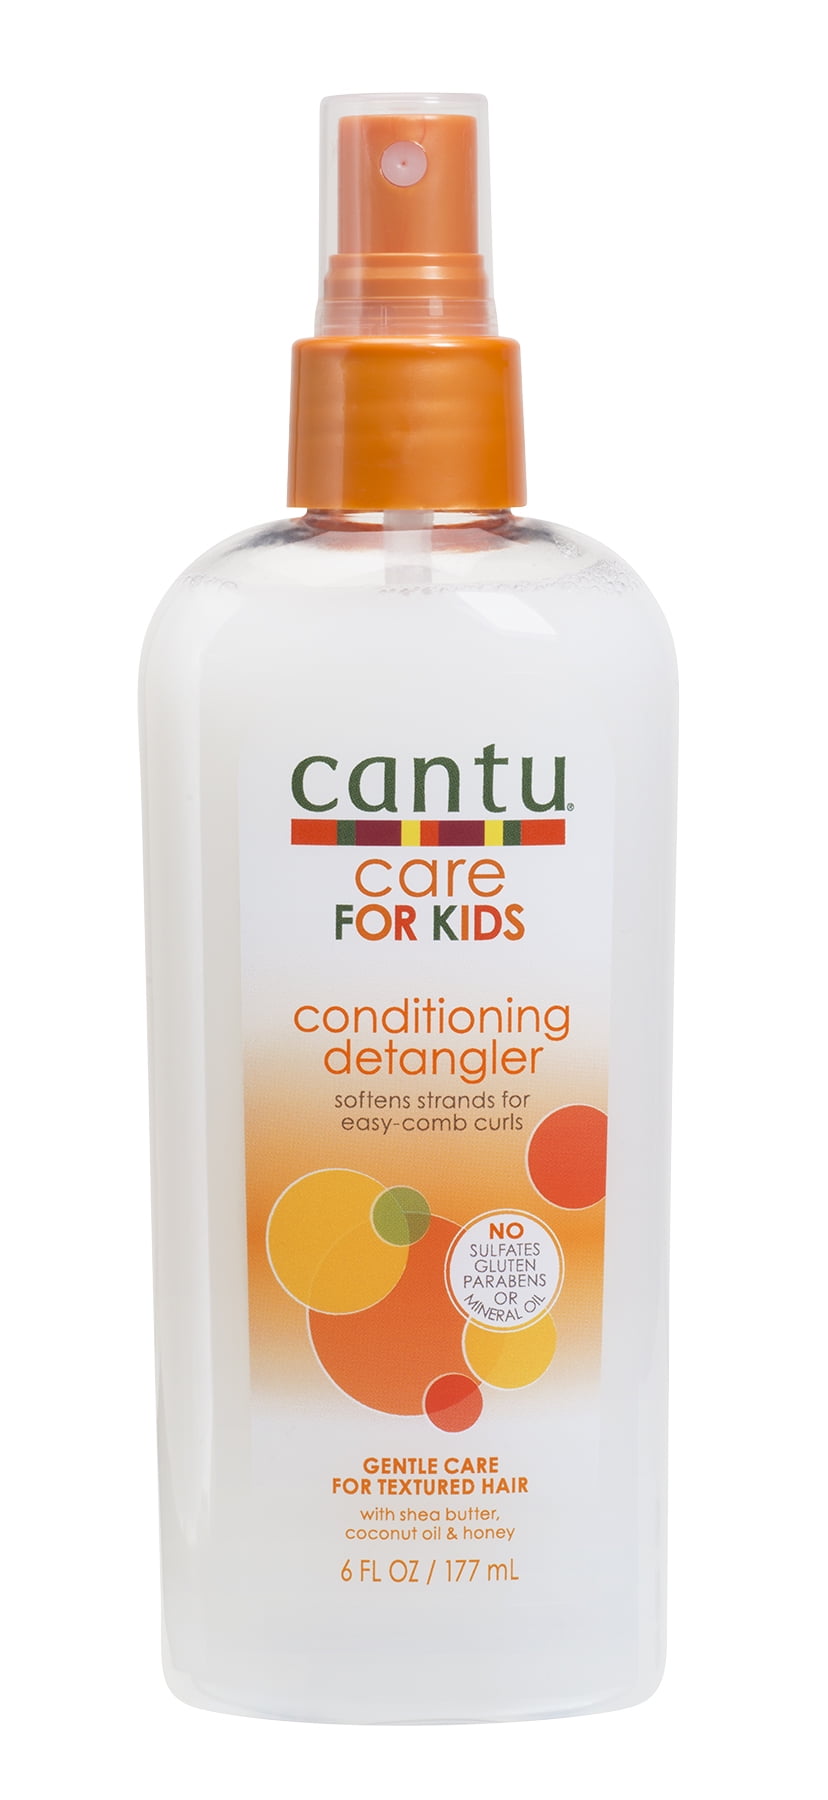 Cantu Care for Kids Conditioning Detangler with Shea Butter, Coconut Oil, and Honey, 6 oz.